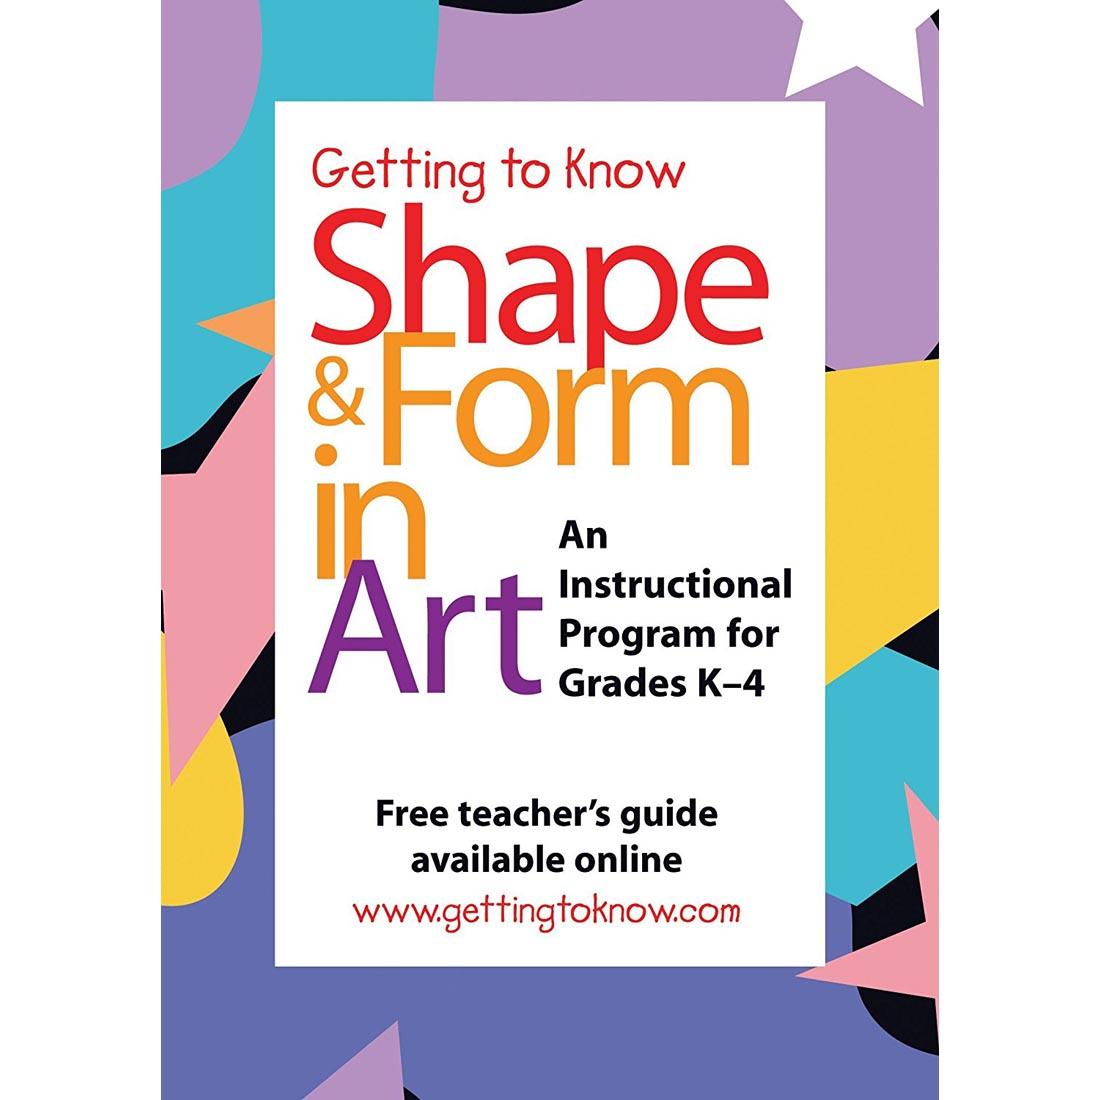 Getting To Know Shape & Form In Art DVD